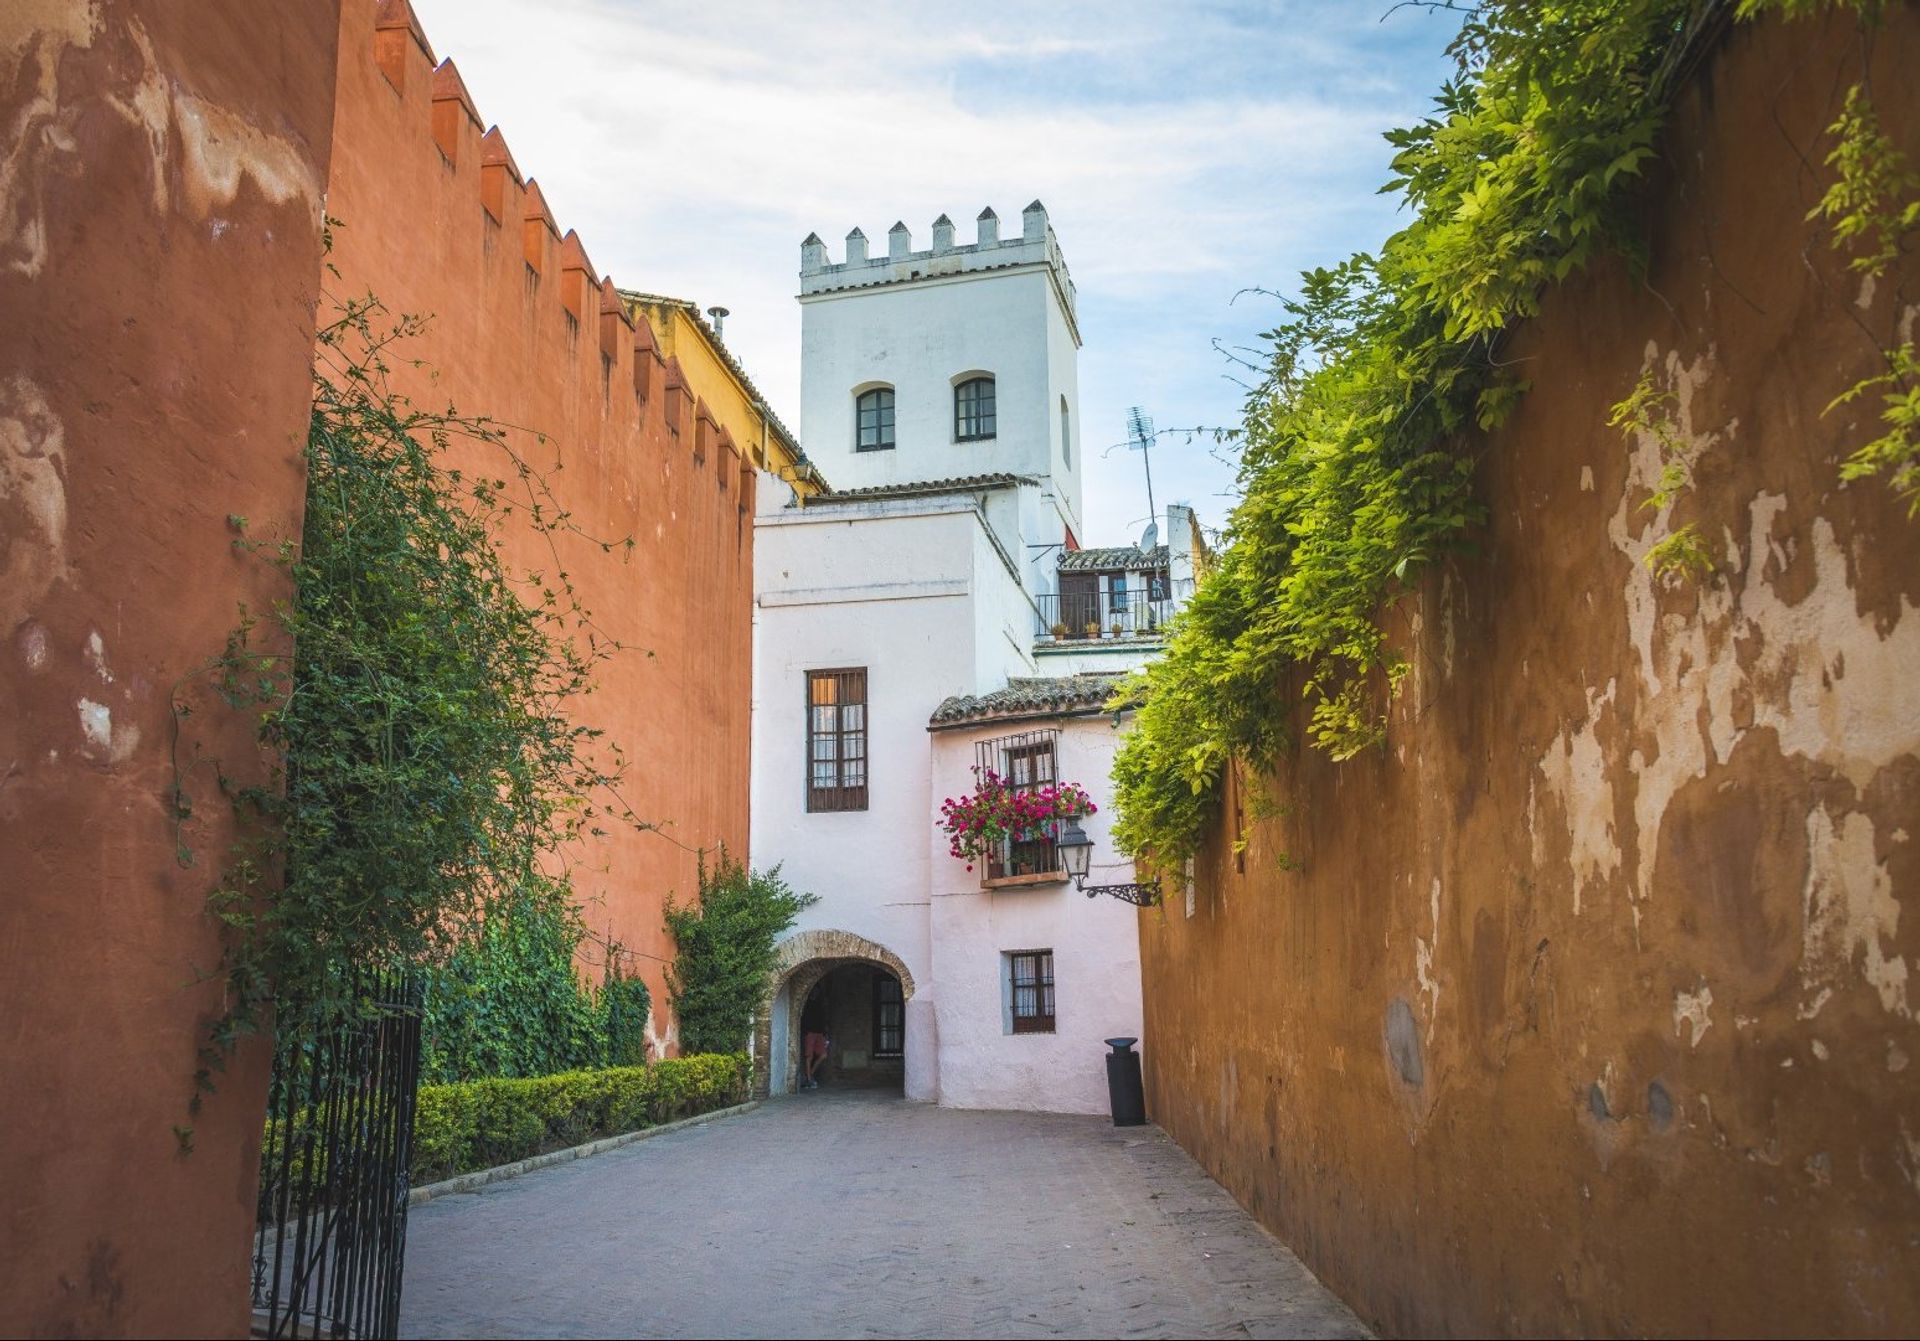 Barrio Santa Cruz is is the first neighbourhood in Seville and the city's tourist heart